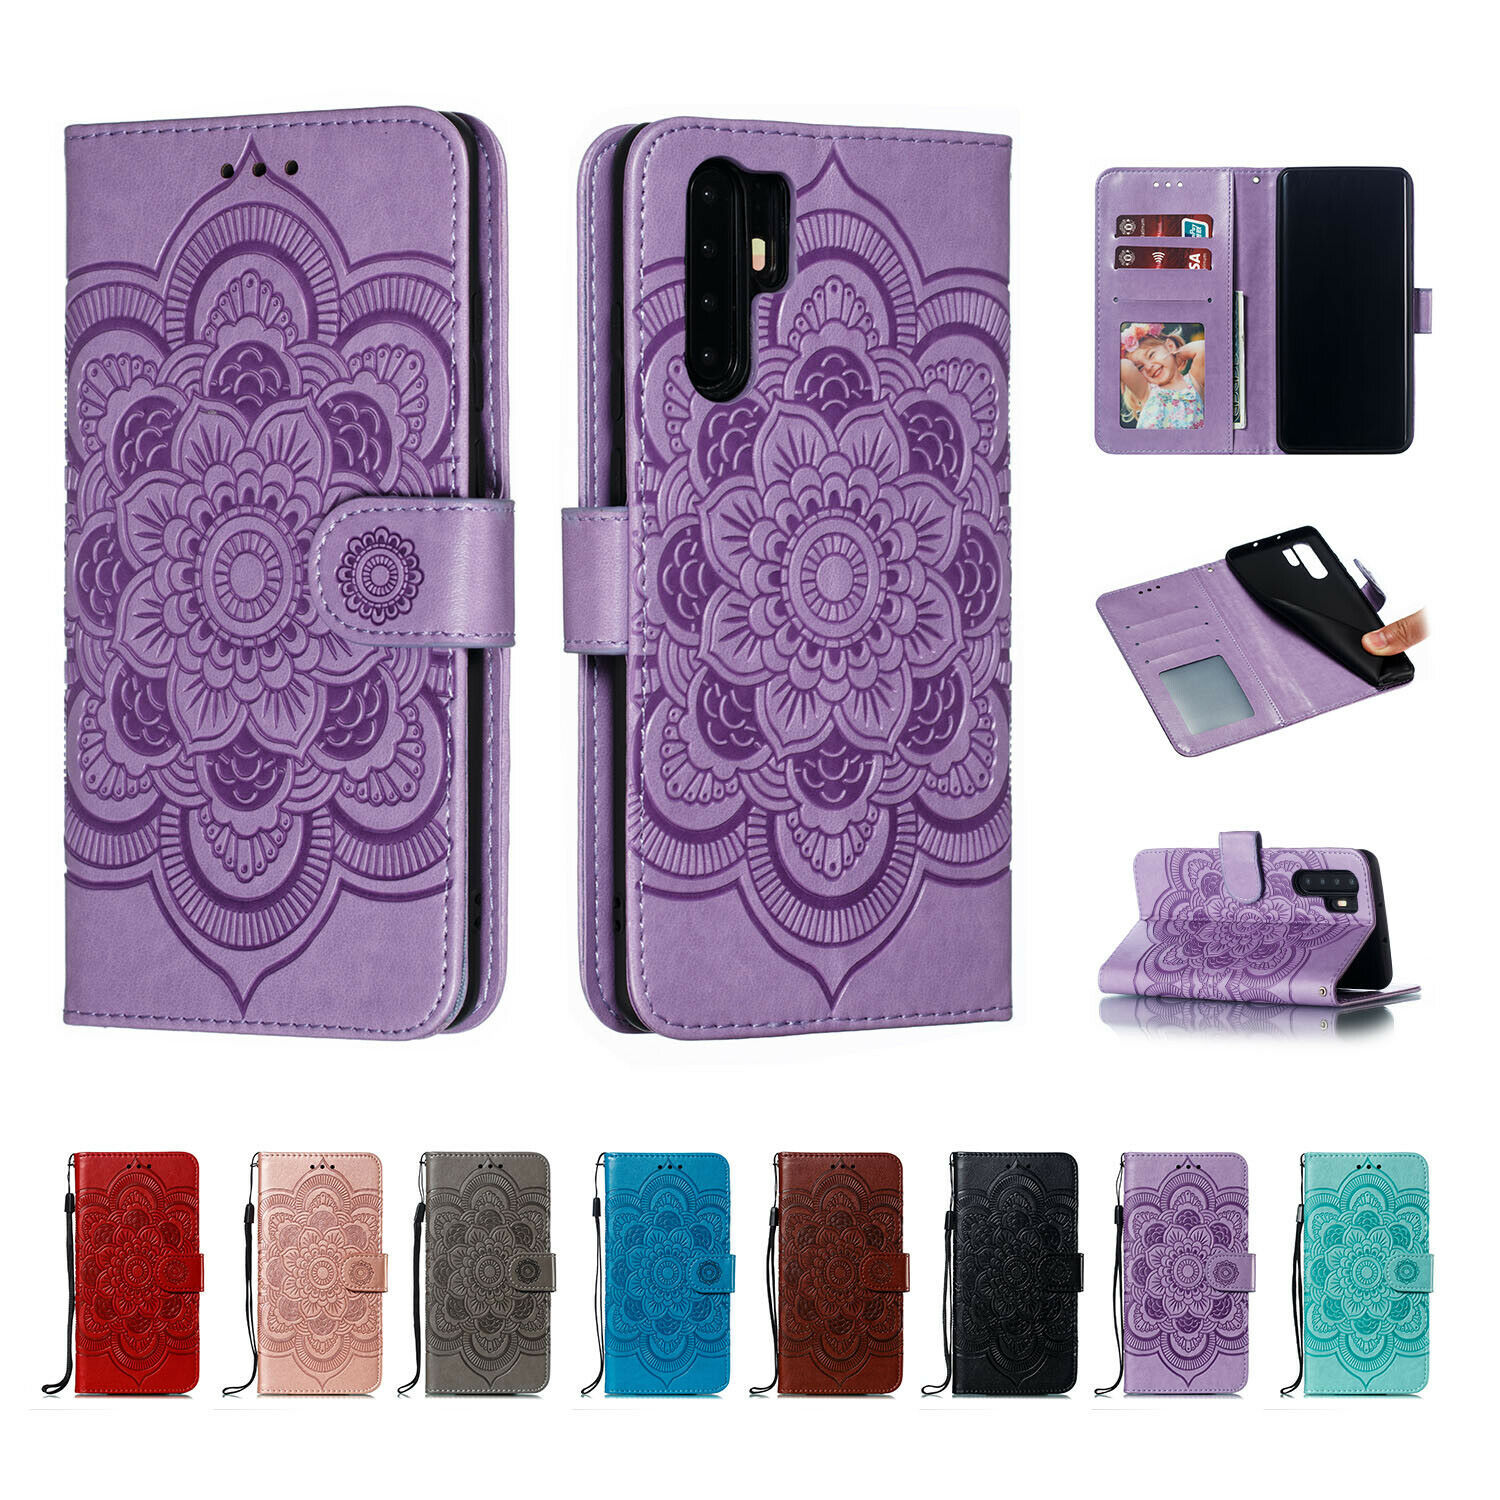 Primary image for For Huawei P30 Lite Pro Mate 20 Y7/Y6 2019 Pattern Case Flip Wallet Card Cover